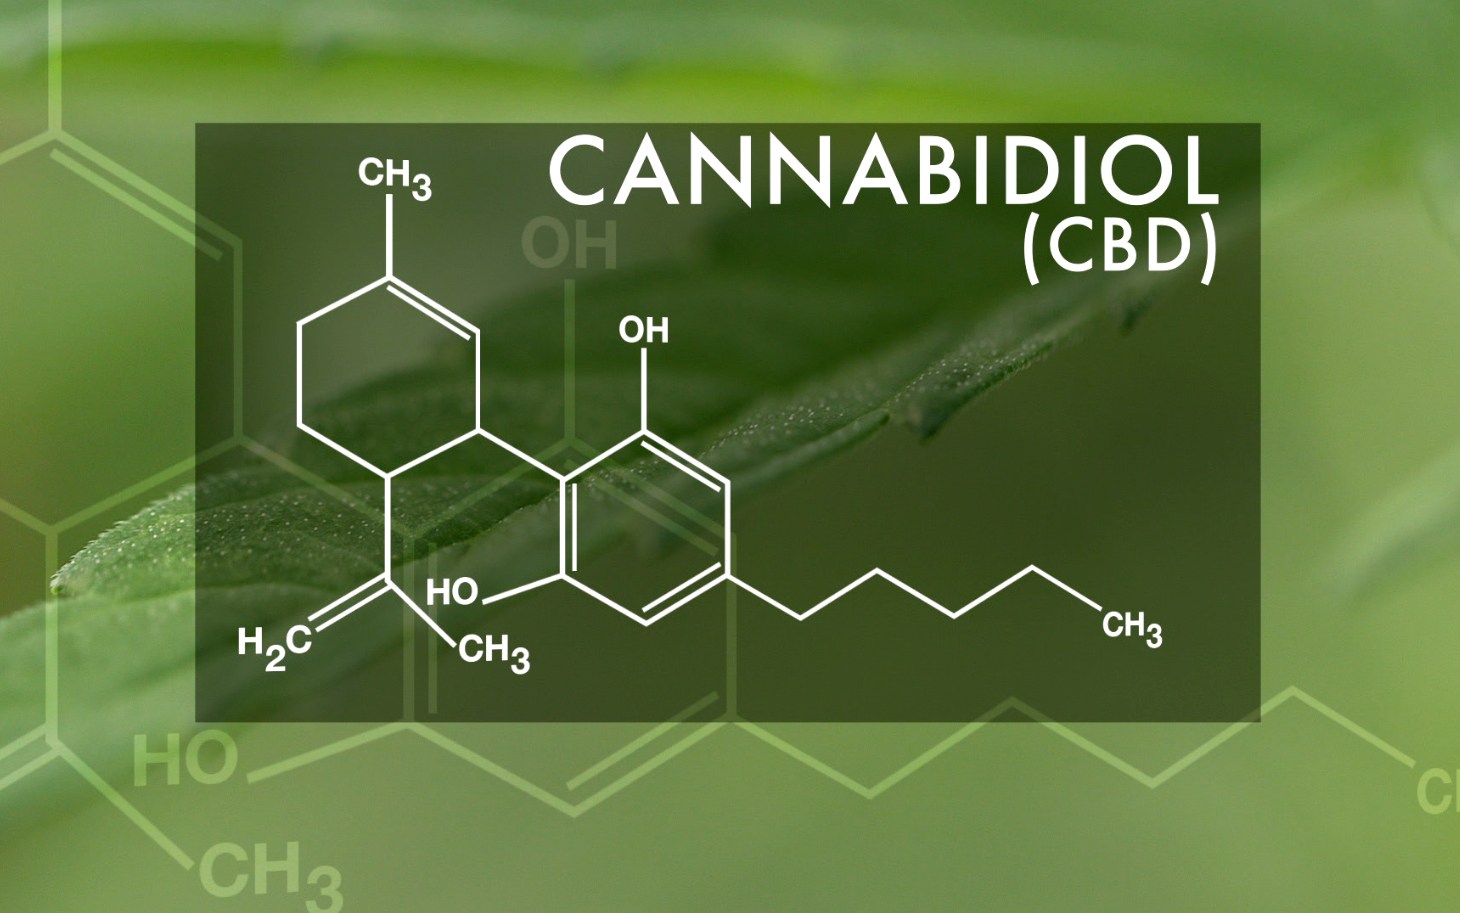 Medible review cbd effective as adjunctive therapy for psychosis study finds